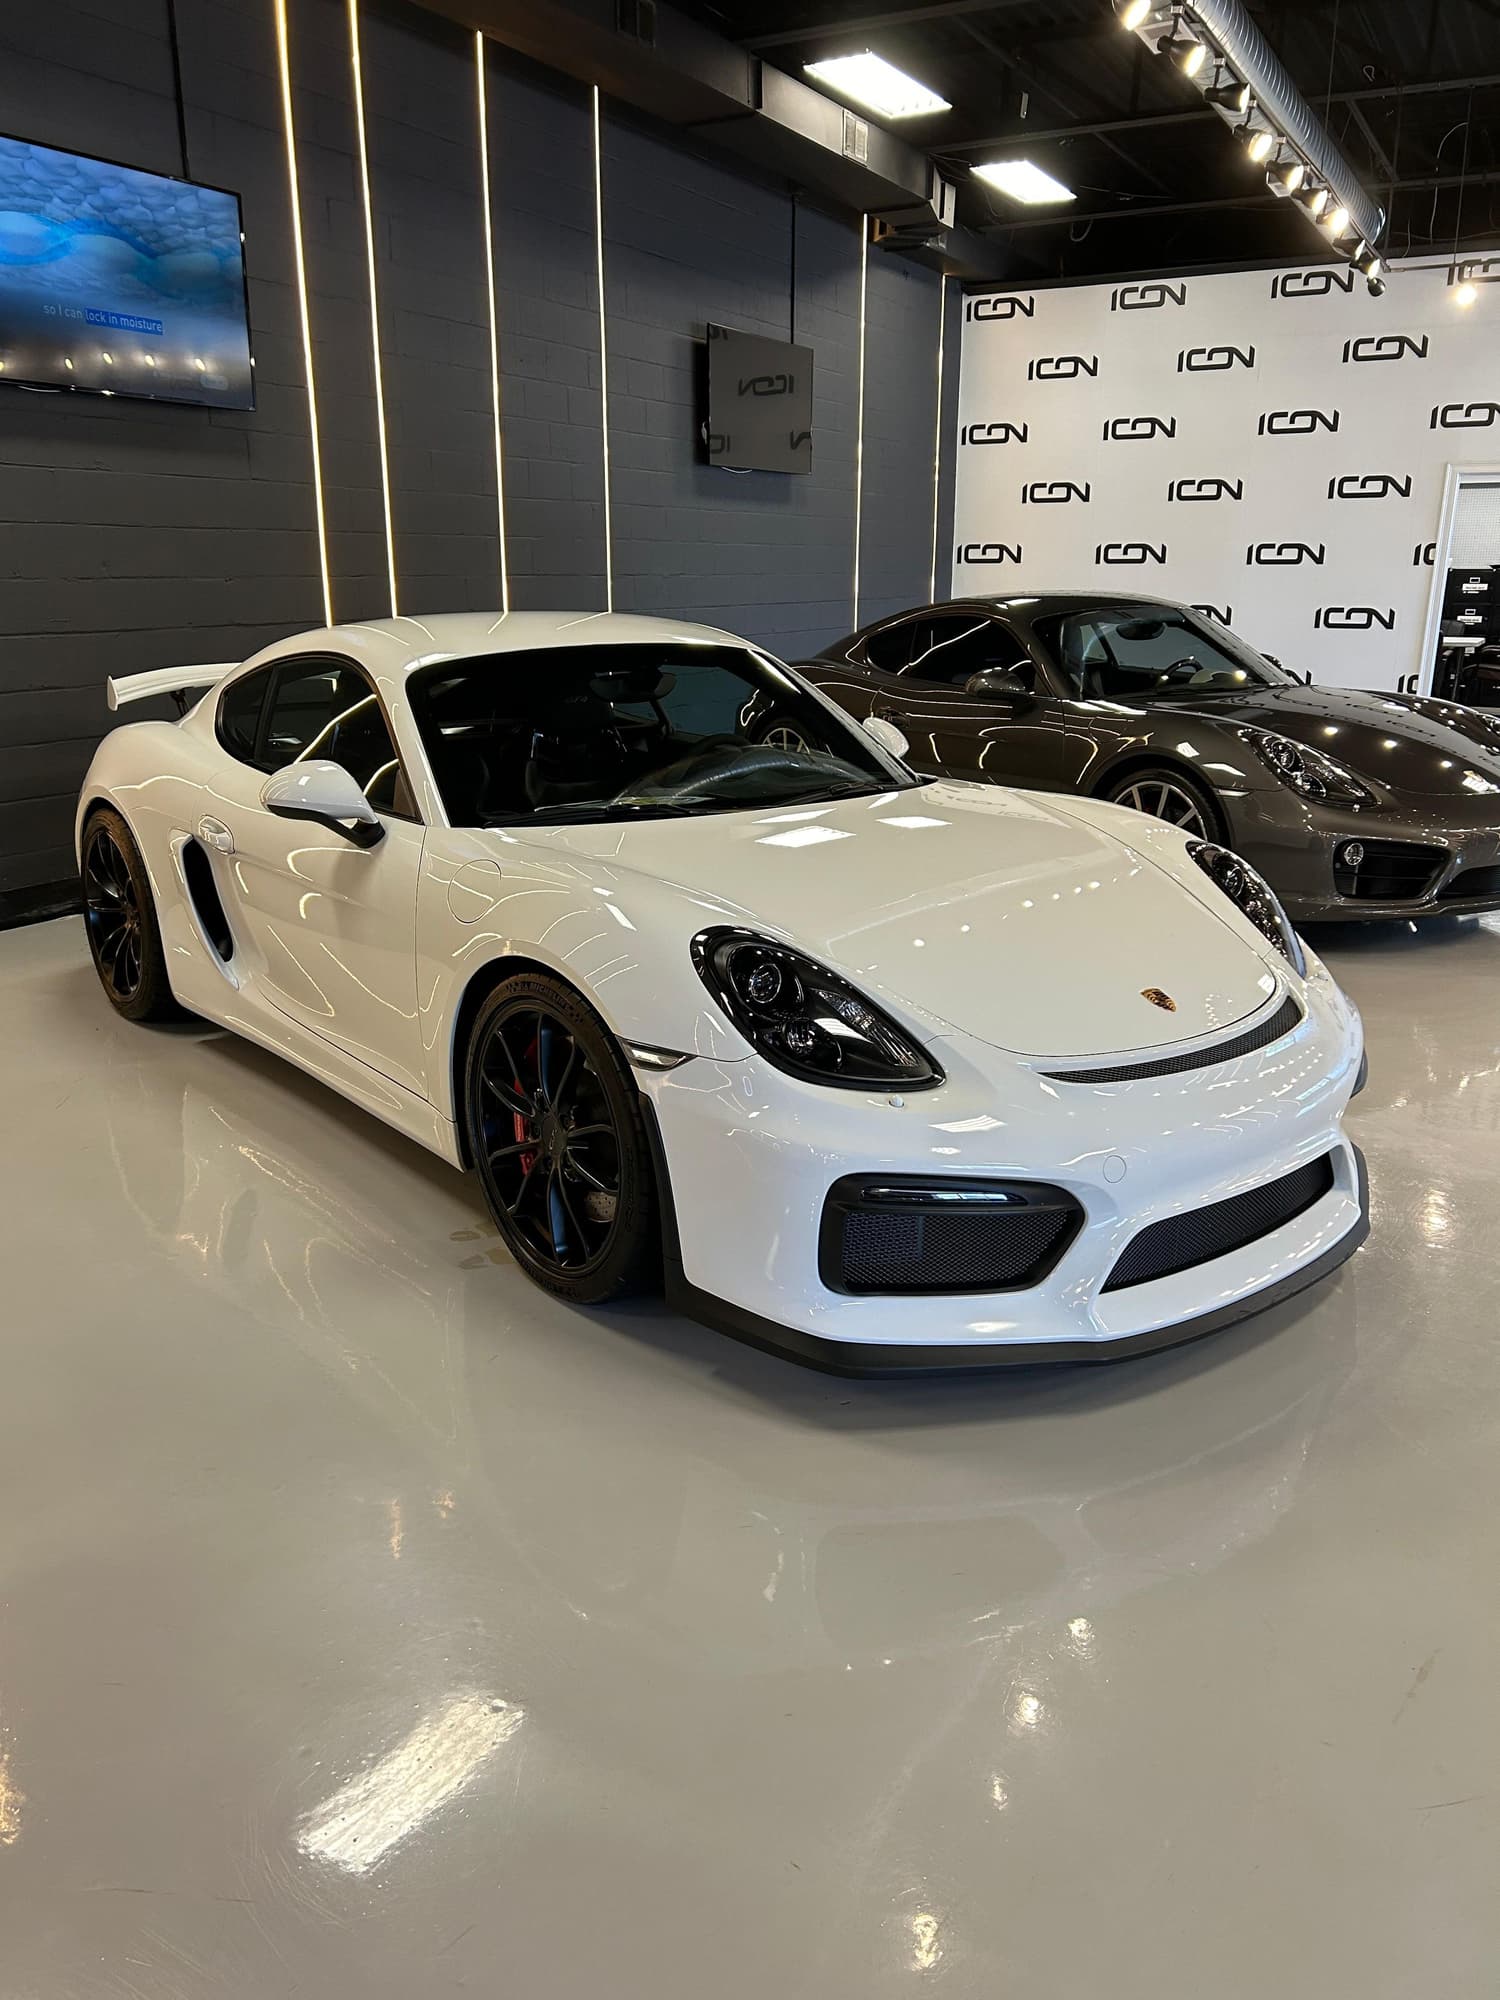 2016 Porsche Cayman GT4 - 981 GT4 w buckets and long-term ownership - Used - VIN WP0AC2A81GK197156 - 19,000 Miles - 6 cyl - 2WD - Manual - Coupe - White - Boston, MA 02155, United States